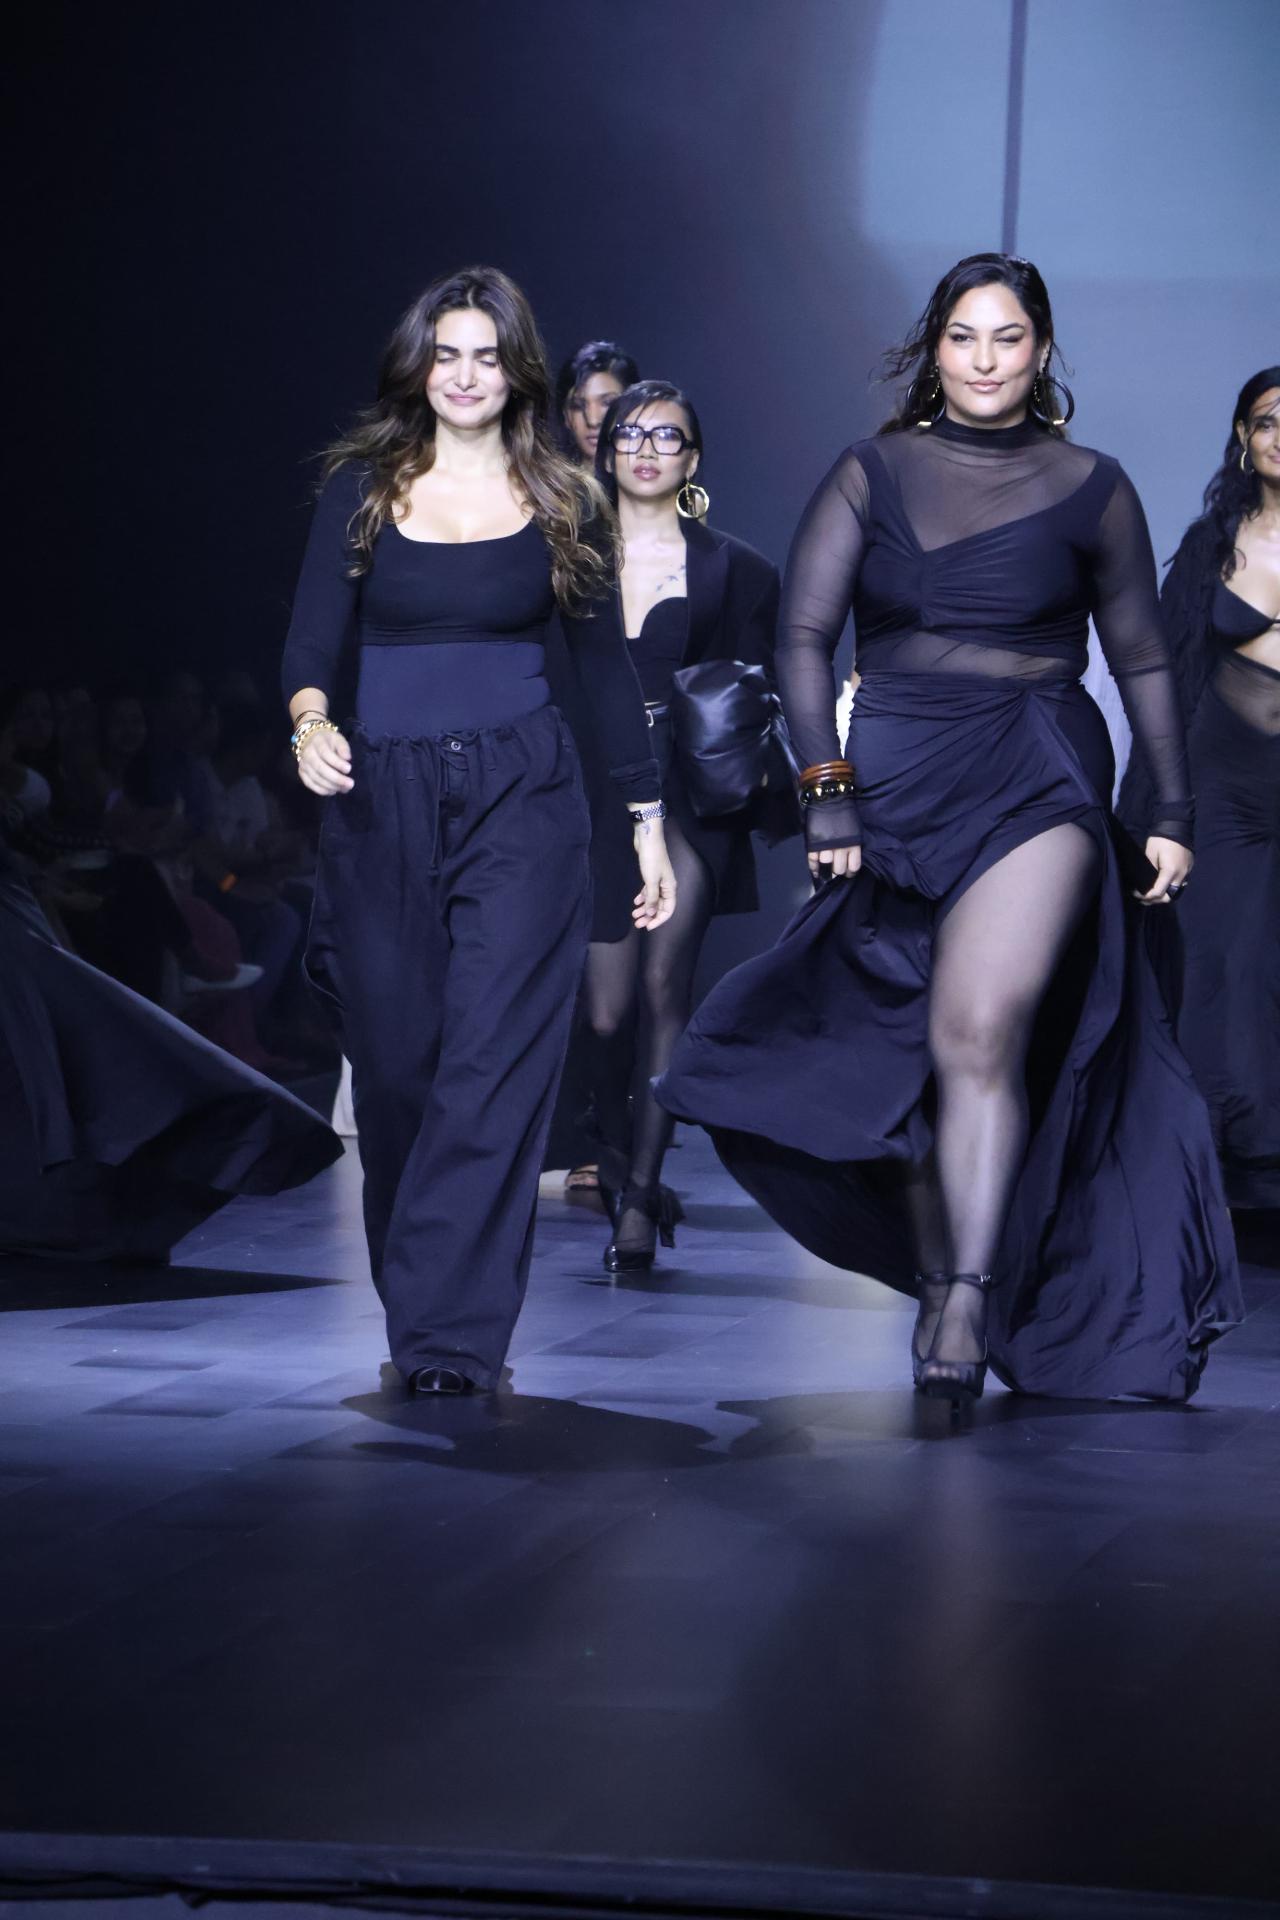 Georgia Andriani and Sakshi S bring in glam and ooze confidence as they walk the ramp together